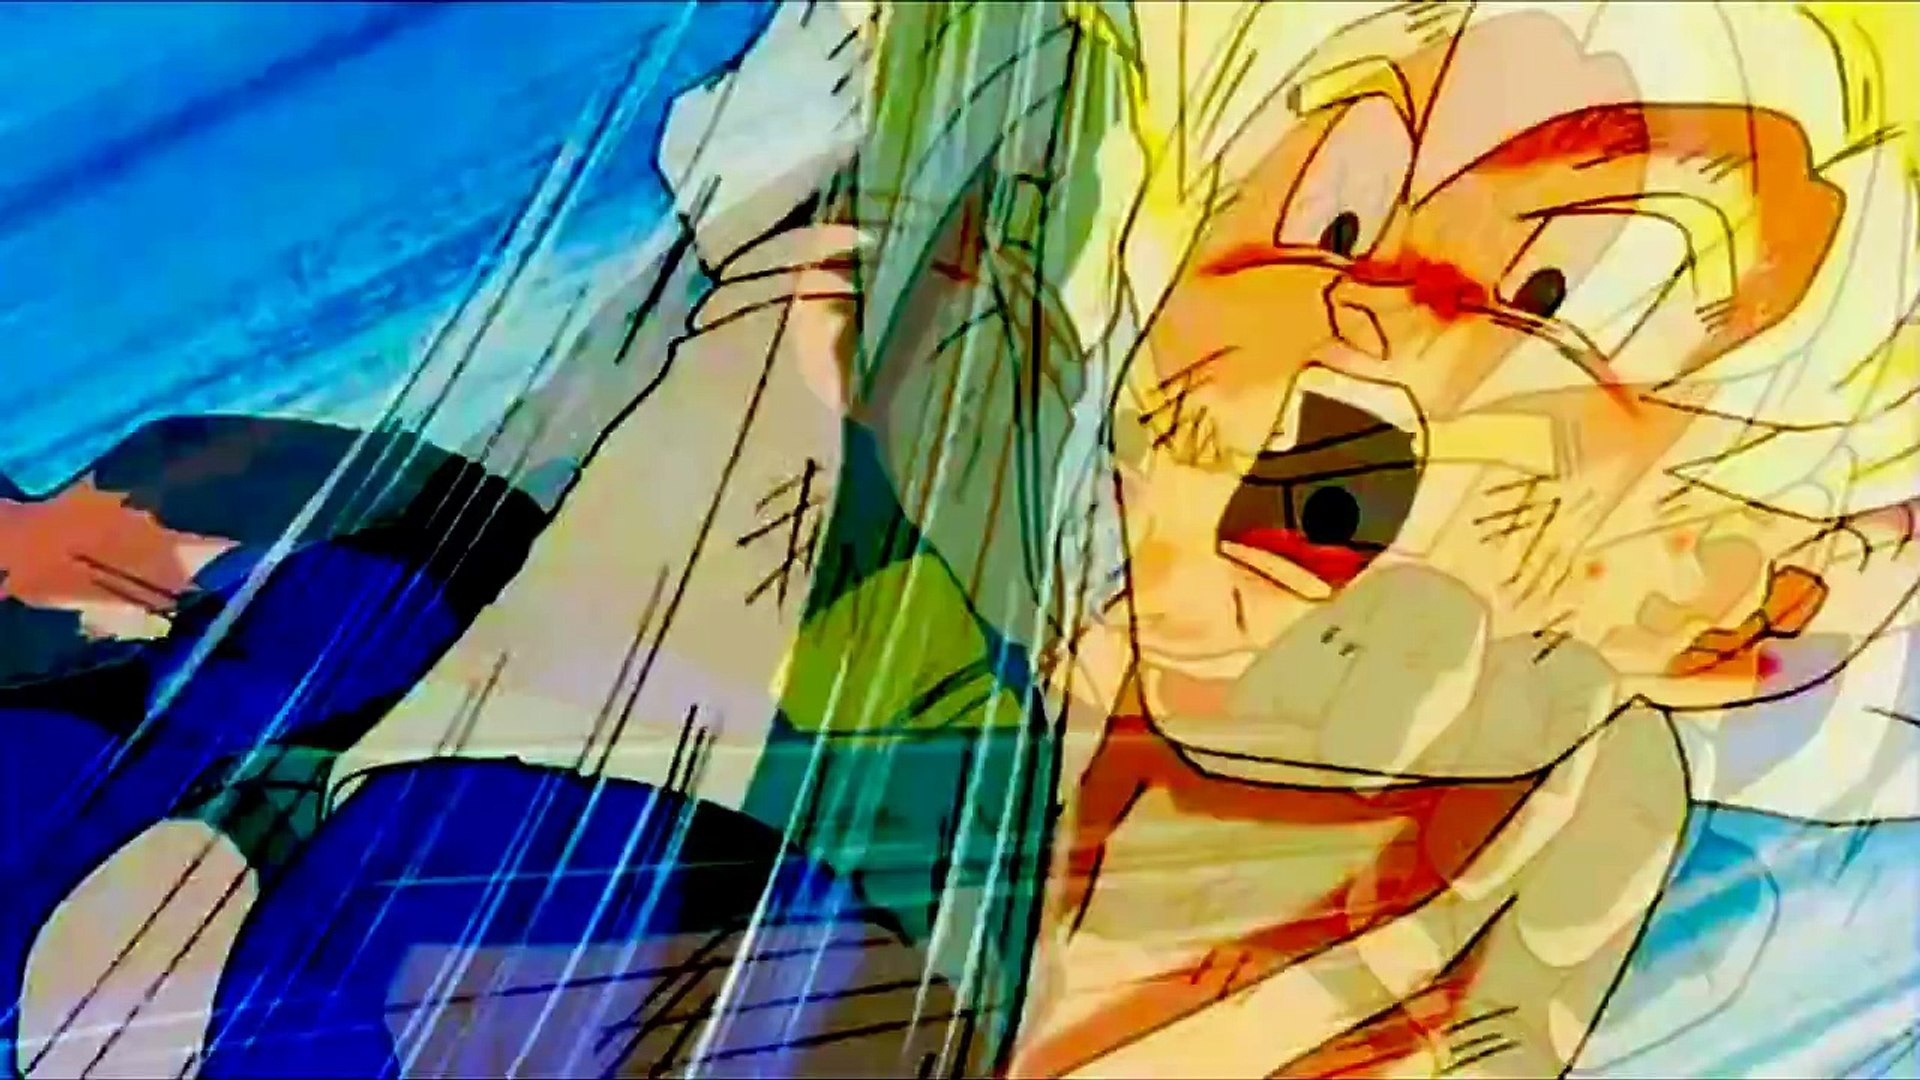 Goku goes Super Saiyan 2 For The First Time (HD) - Dailymotion Video